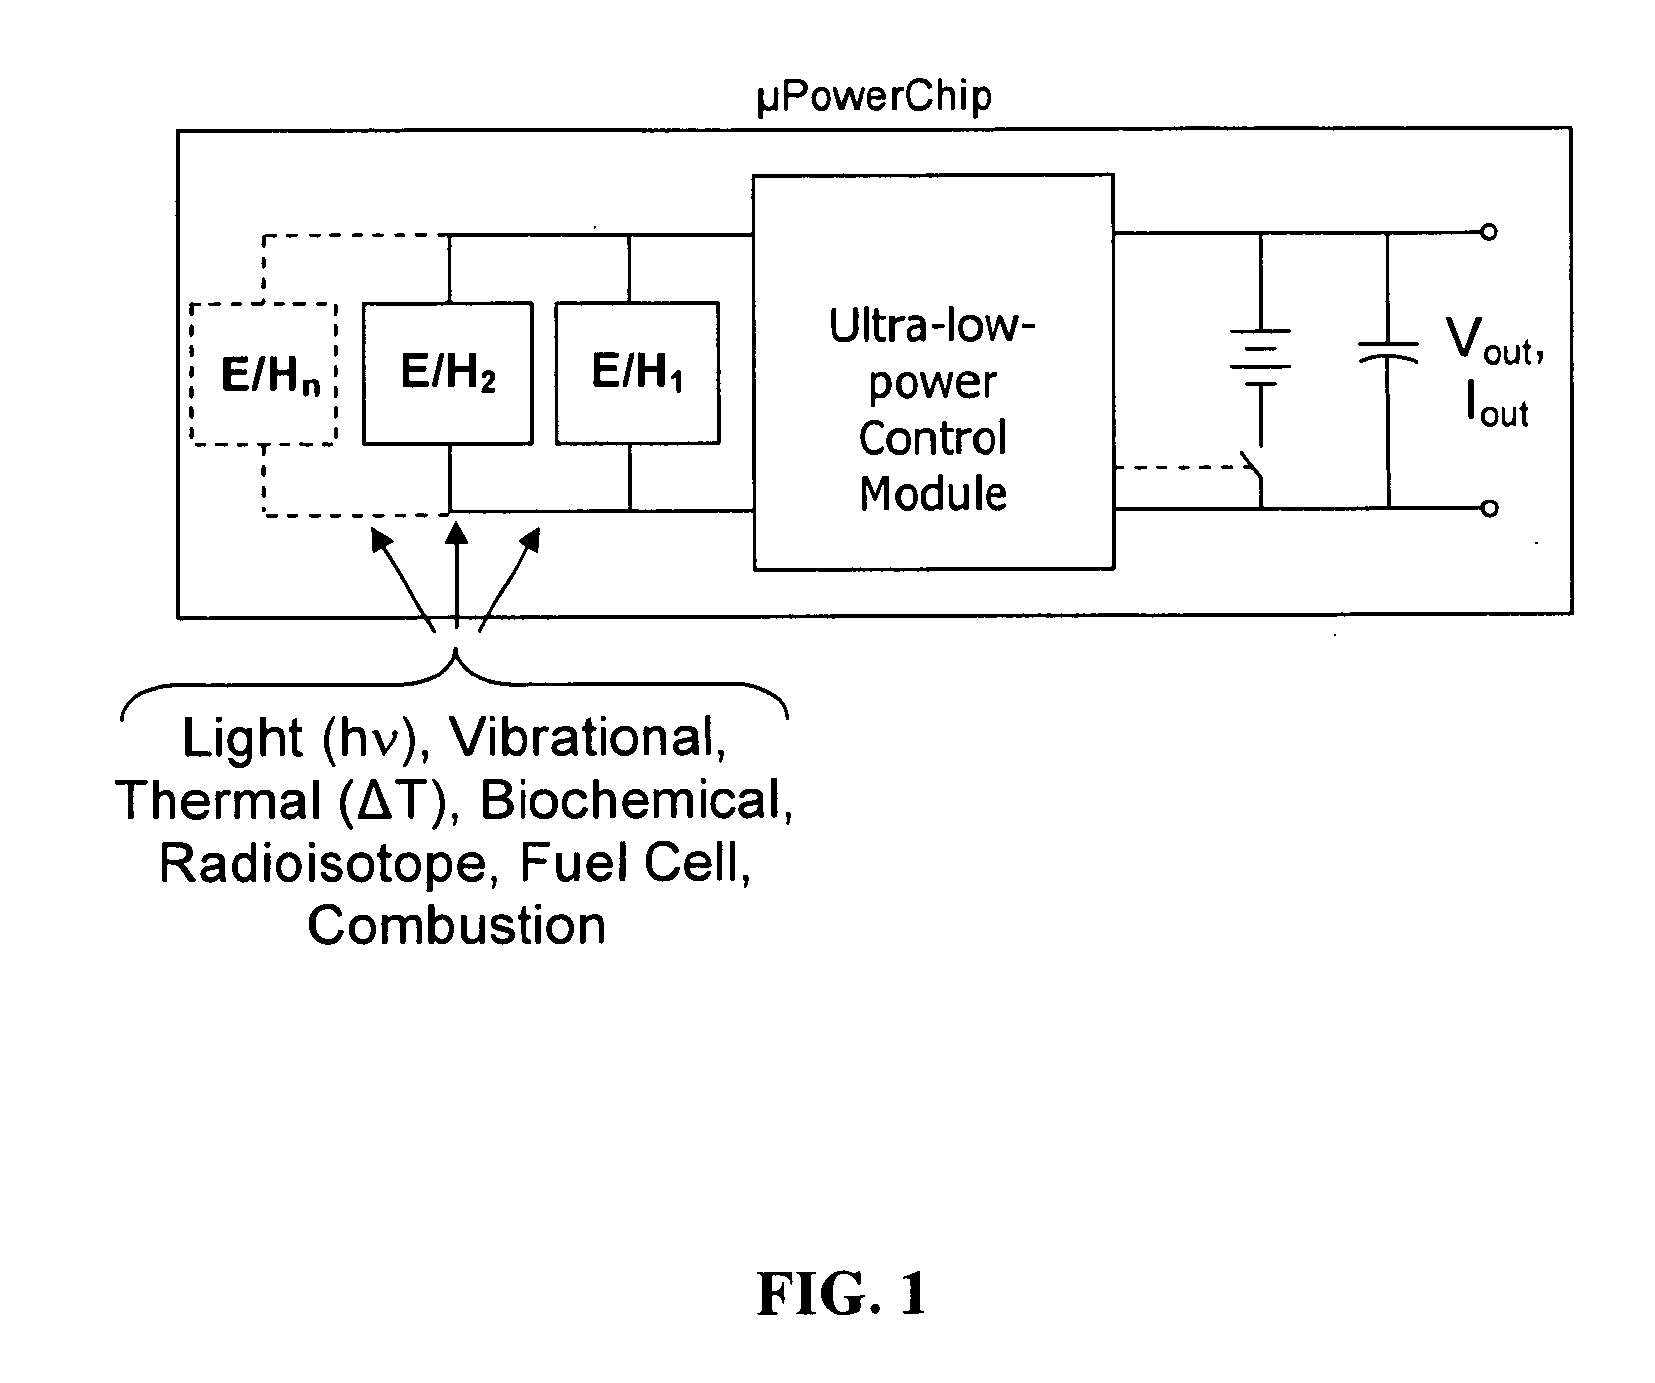 Method and Apparatus for Energy Harvesting and/or Generation, Storage, and Delivery